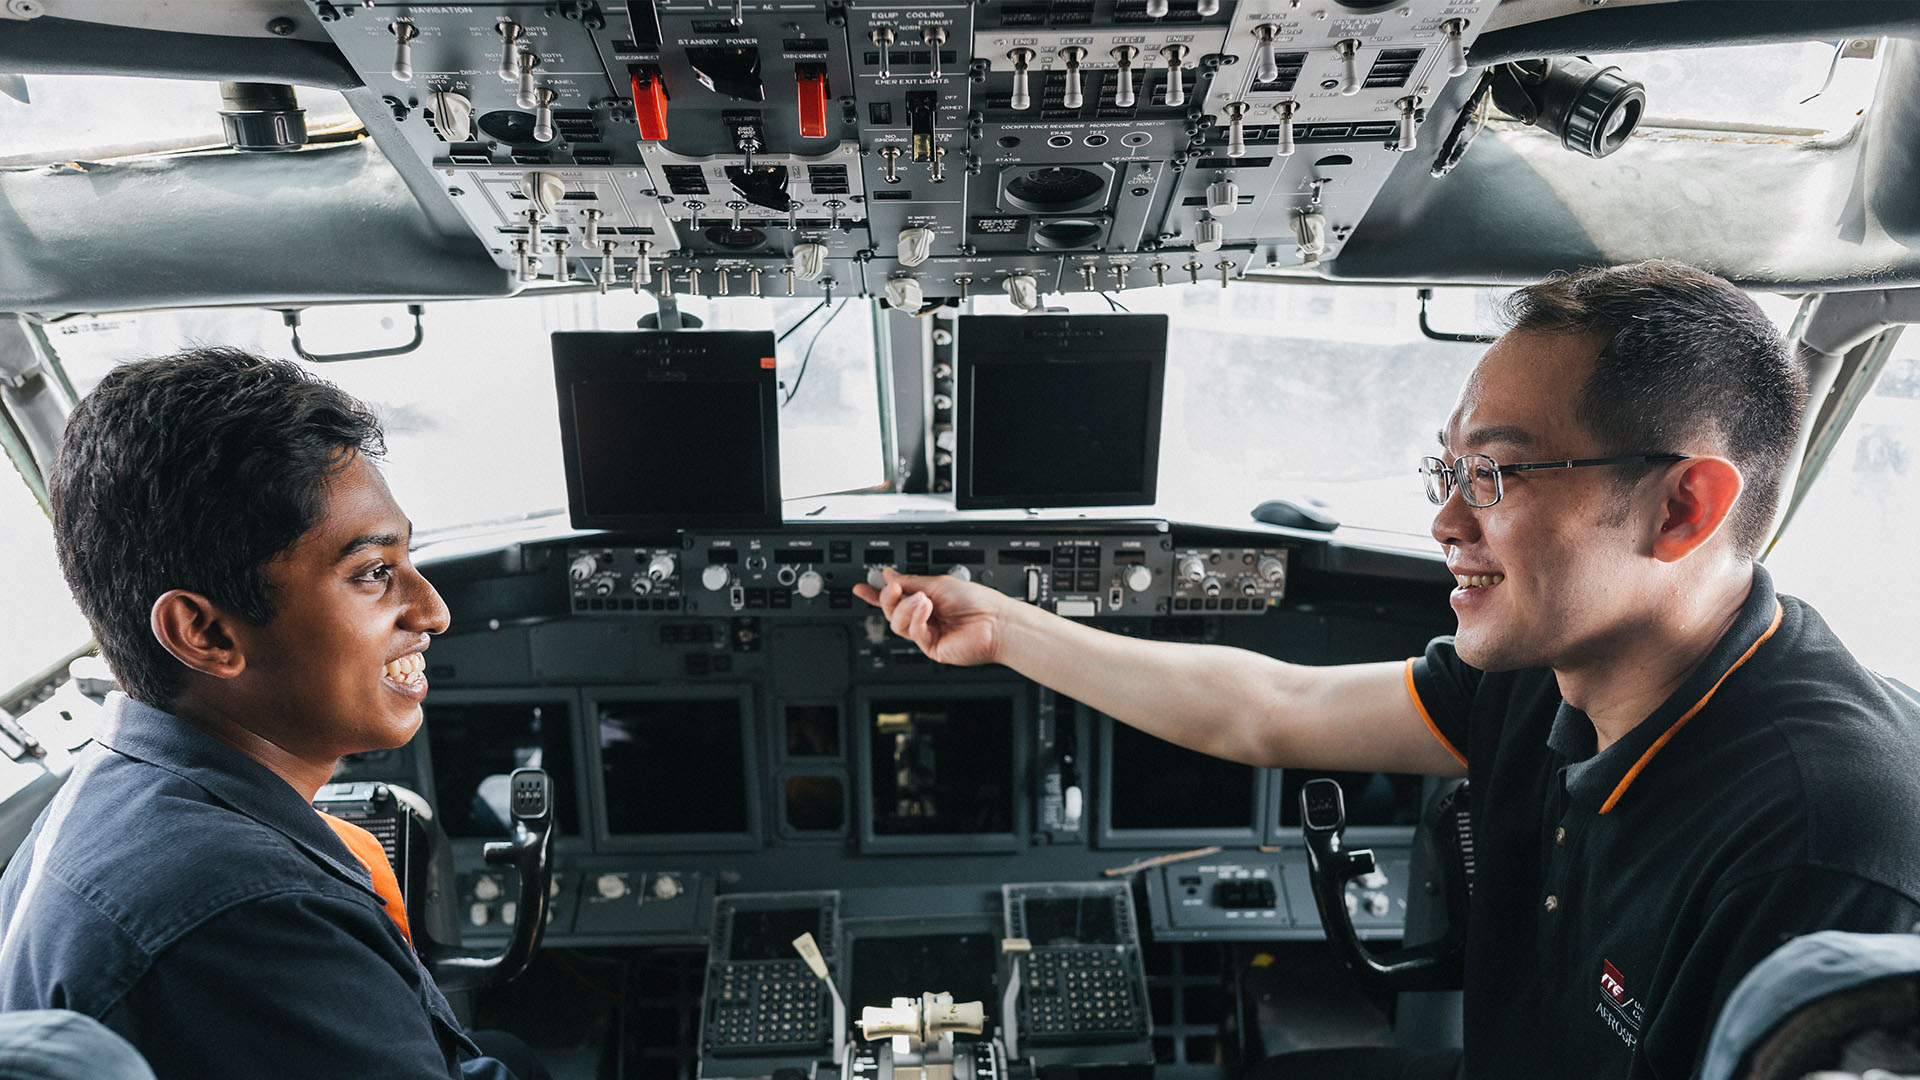 A Lecturer and Student in an Aircraft Training Session